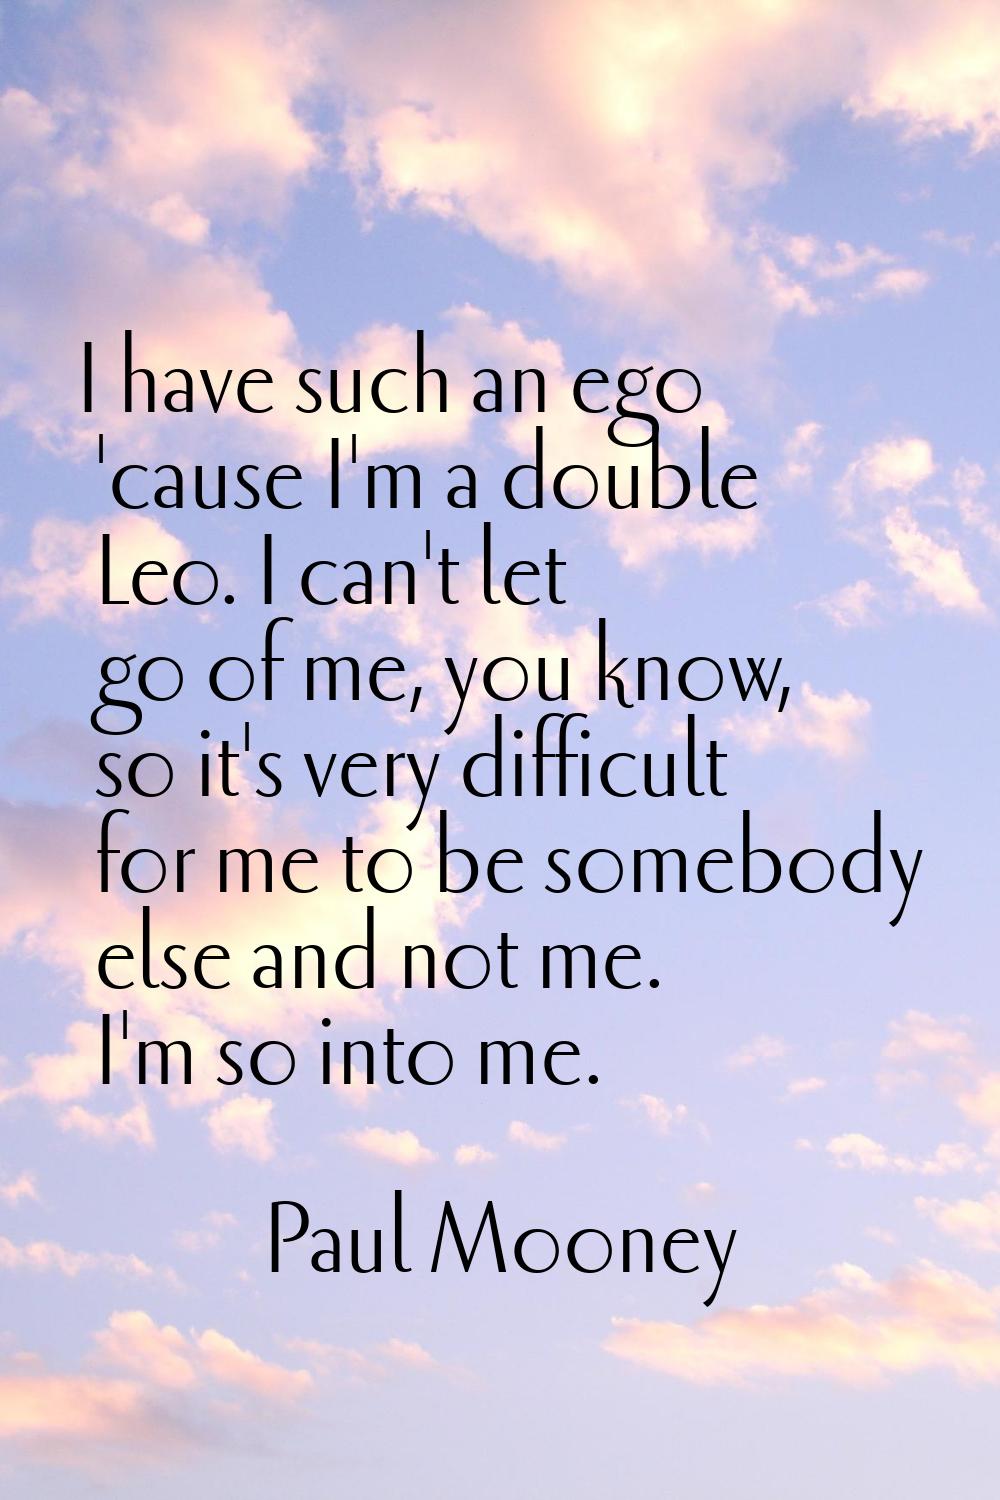 I have such an ego 'cause I'm a double Leo. I can't let go of me, you know, so it's very difficult 